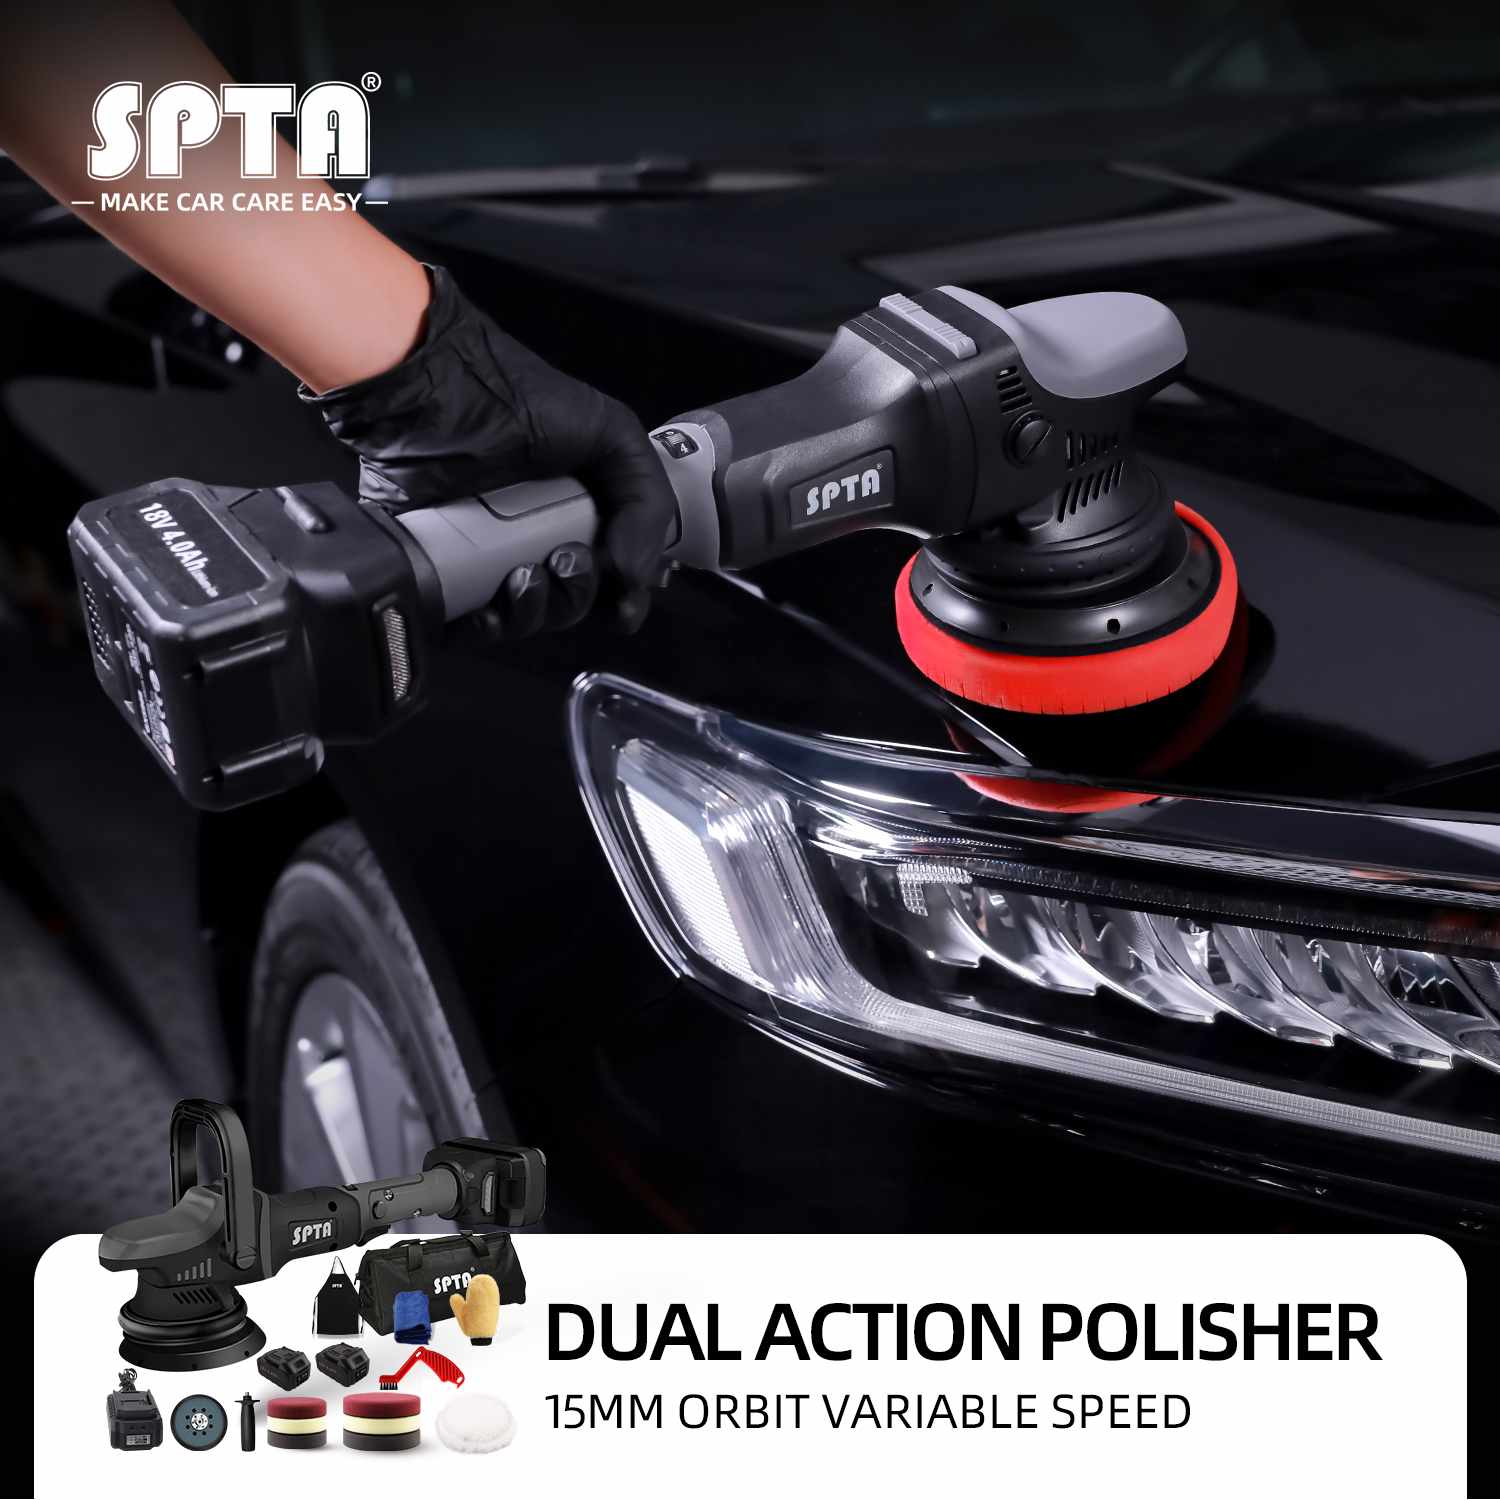 SPTA 5 (125mm) Cordless Car Polisher, 15mm Orbit New Version Cordless  Polisher with EU Plug for Charger-GX5966